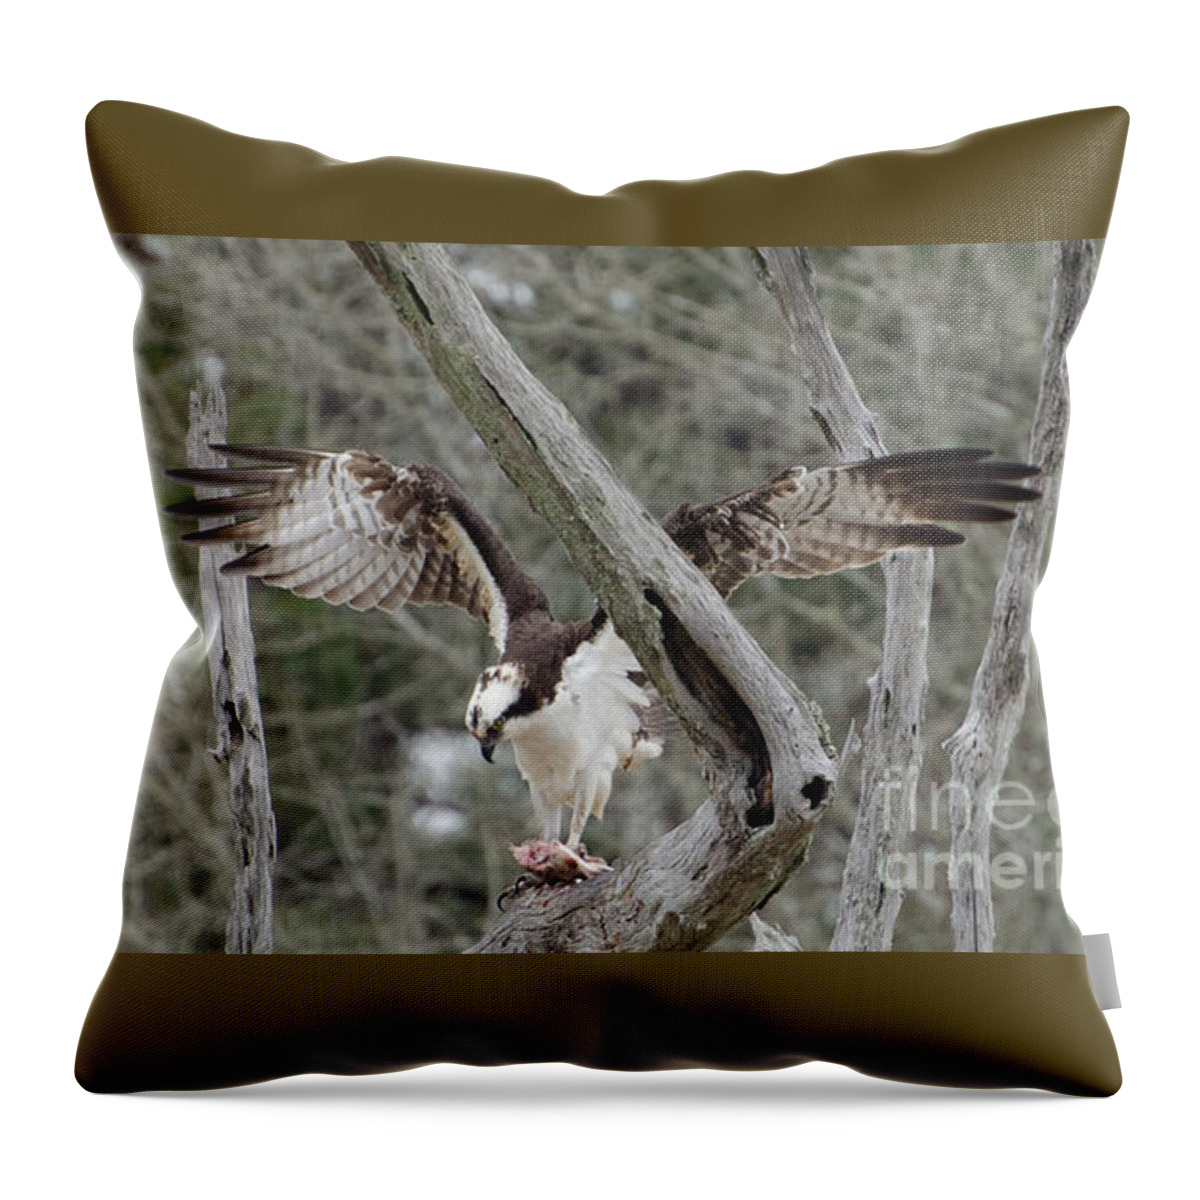 Bird Throw Pillow featuring the photograph Thank You Lord For This Food, Osprey by Donna Brown